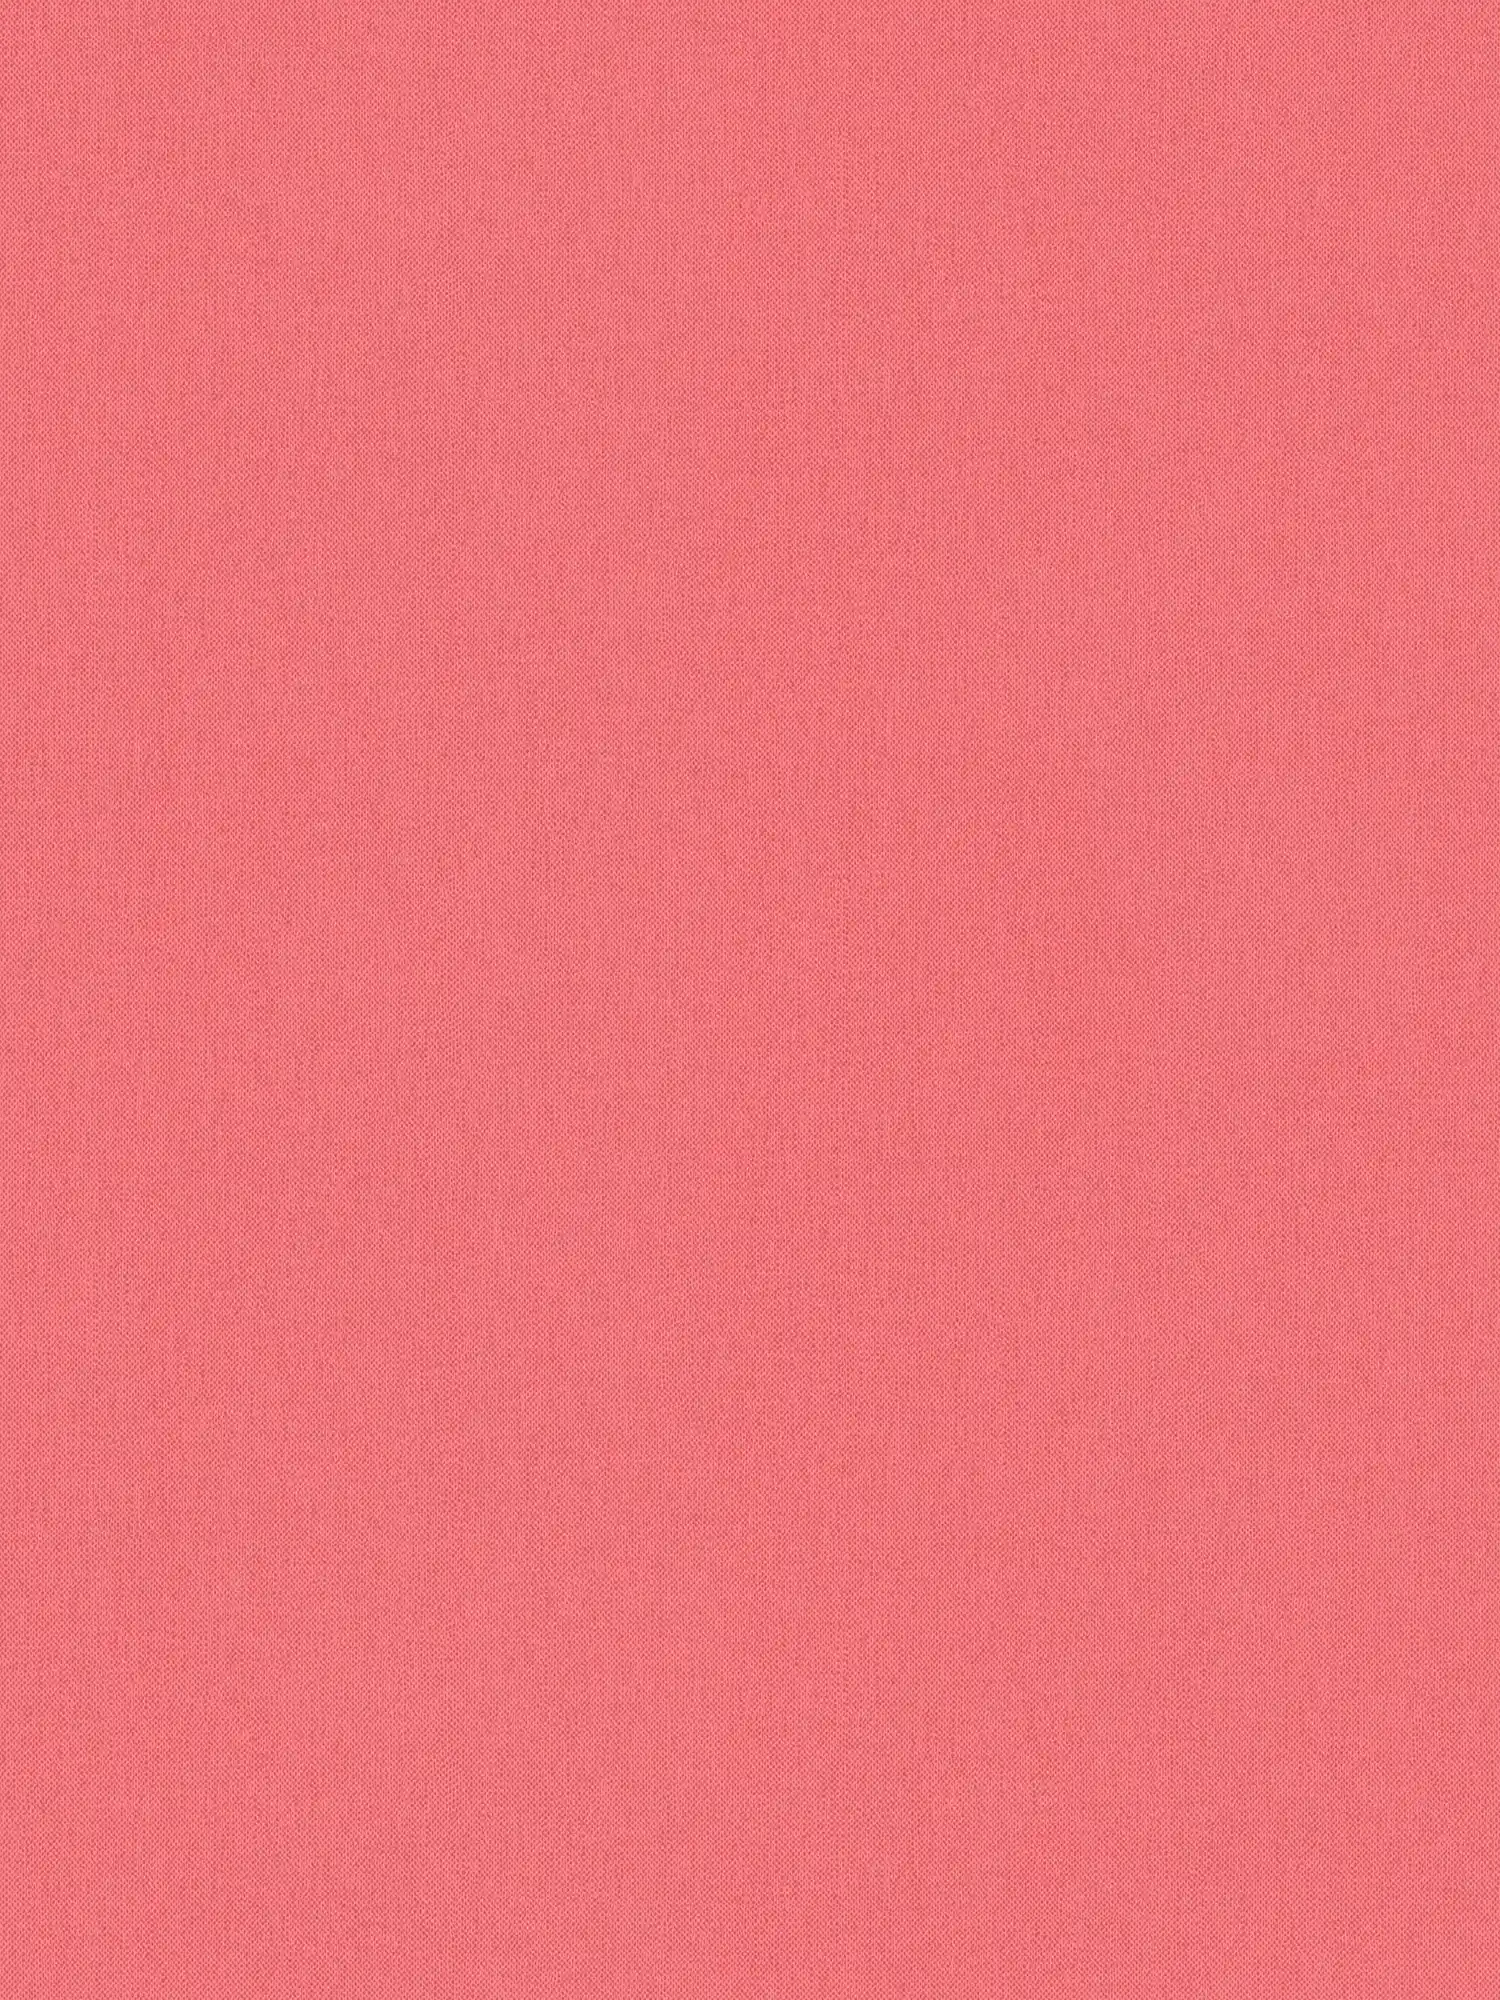 Wallpaper salmon red & pink with plain linen texture for girls room
